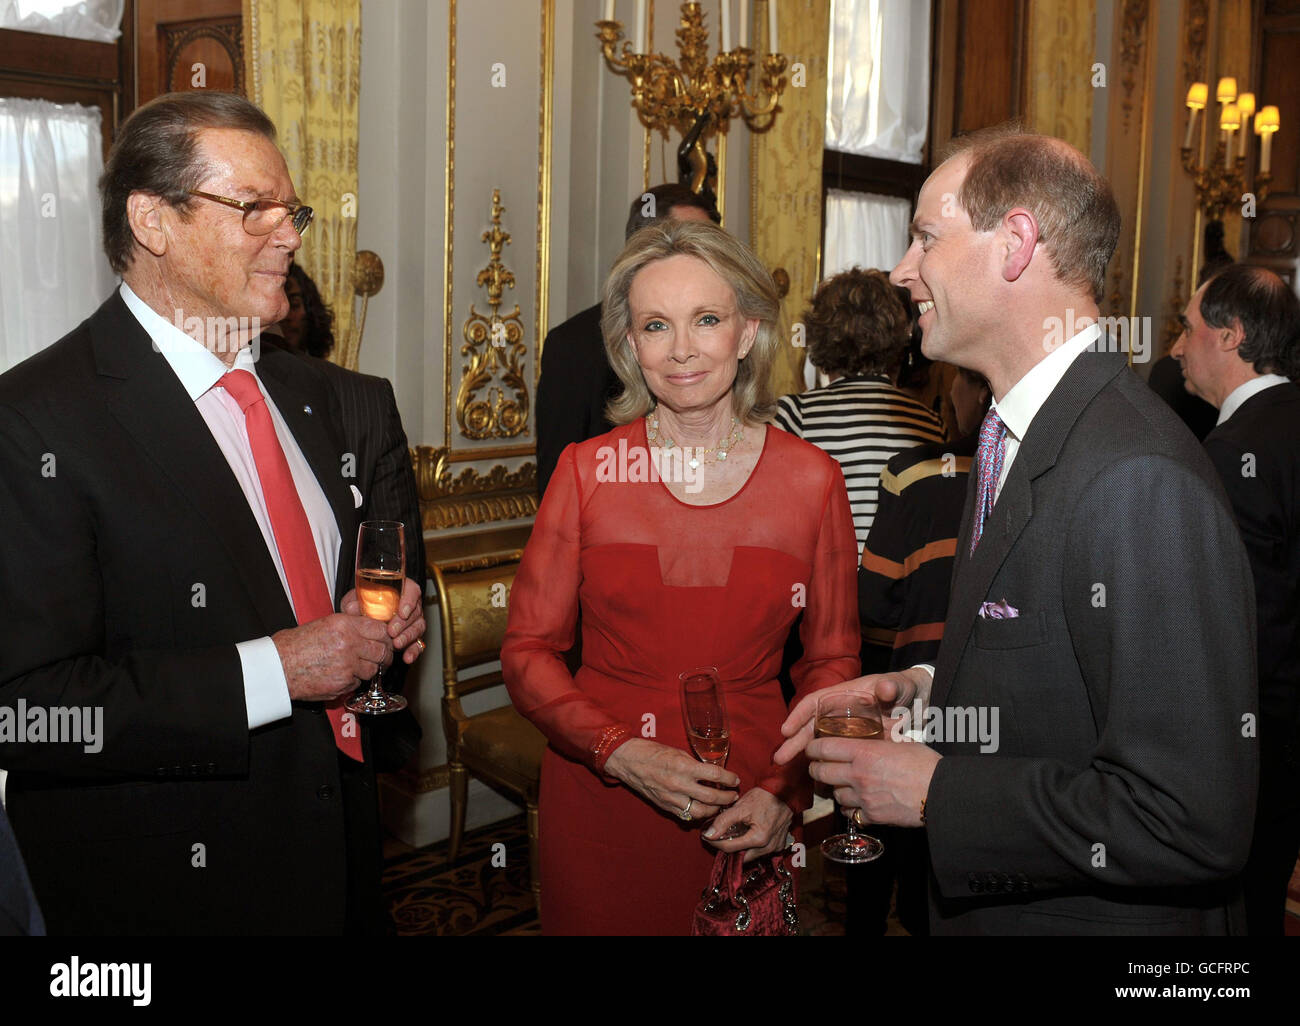 The Earl of Wessex (right) talks with Sir Roger Moore and his wife Kristina, at a drinks reception for the 'Film without Borders' charity at Buckingham Palace in central London. Stock Photo